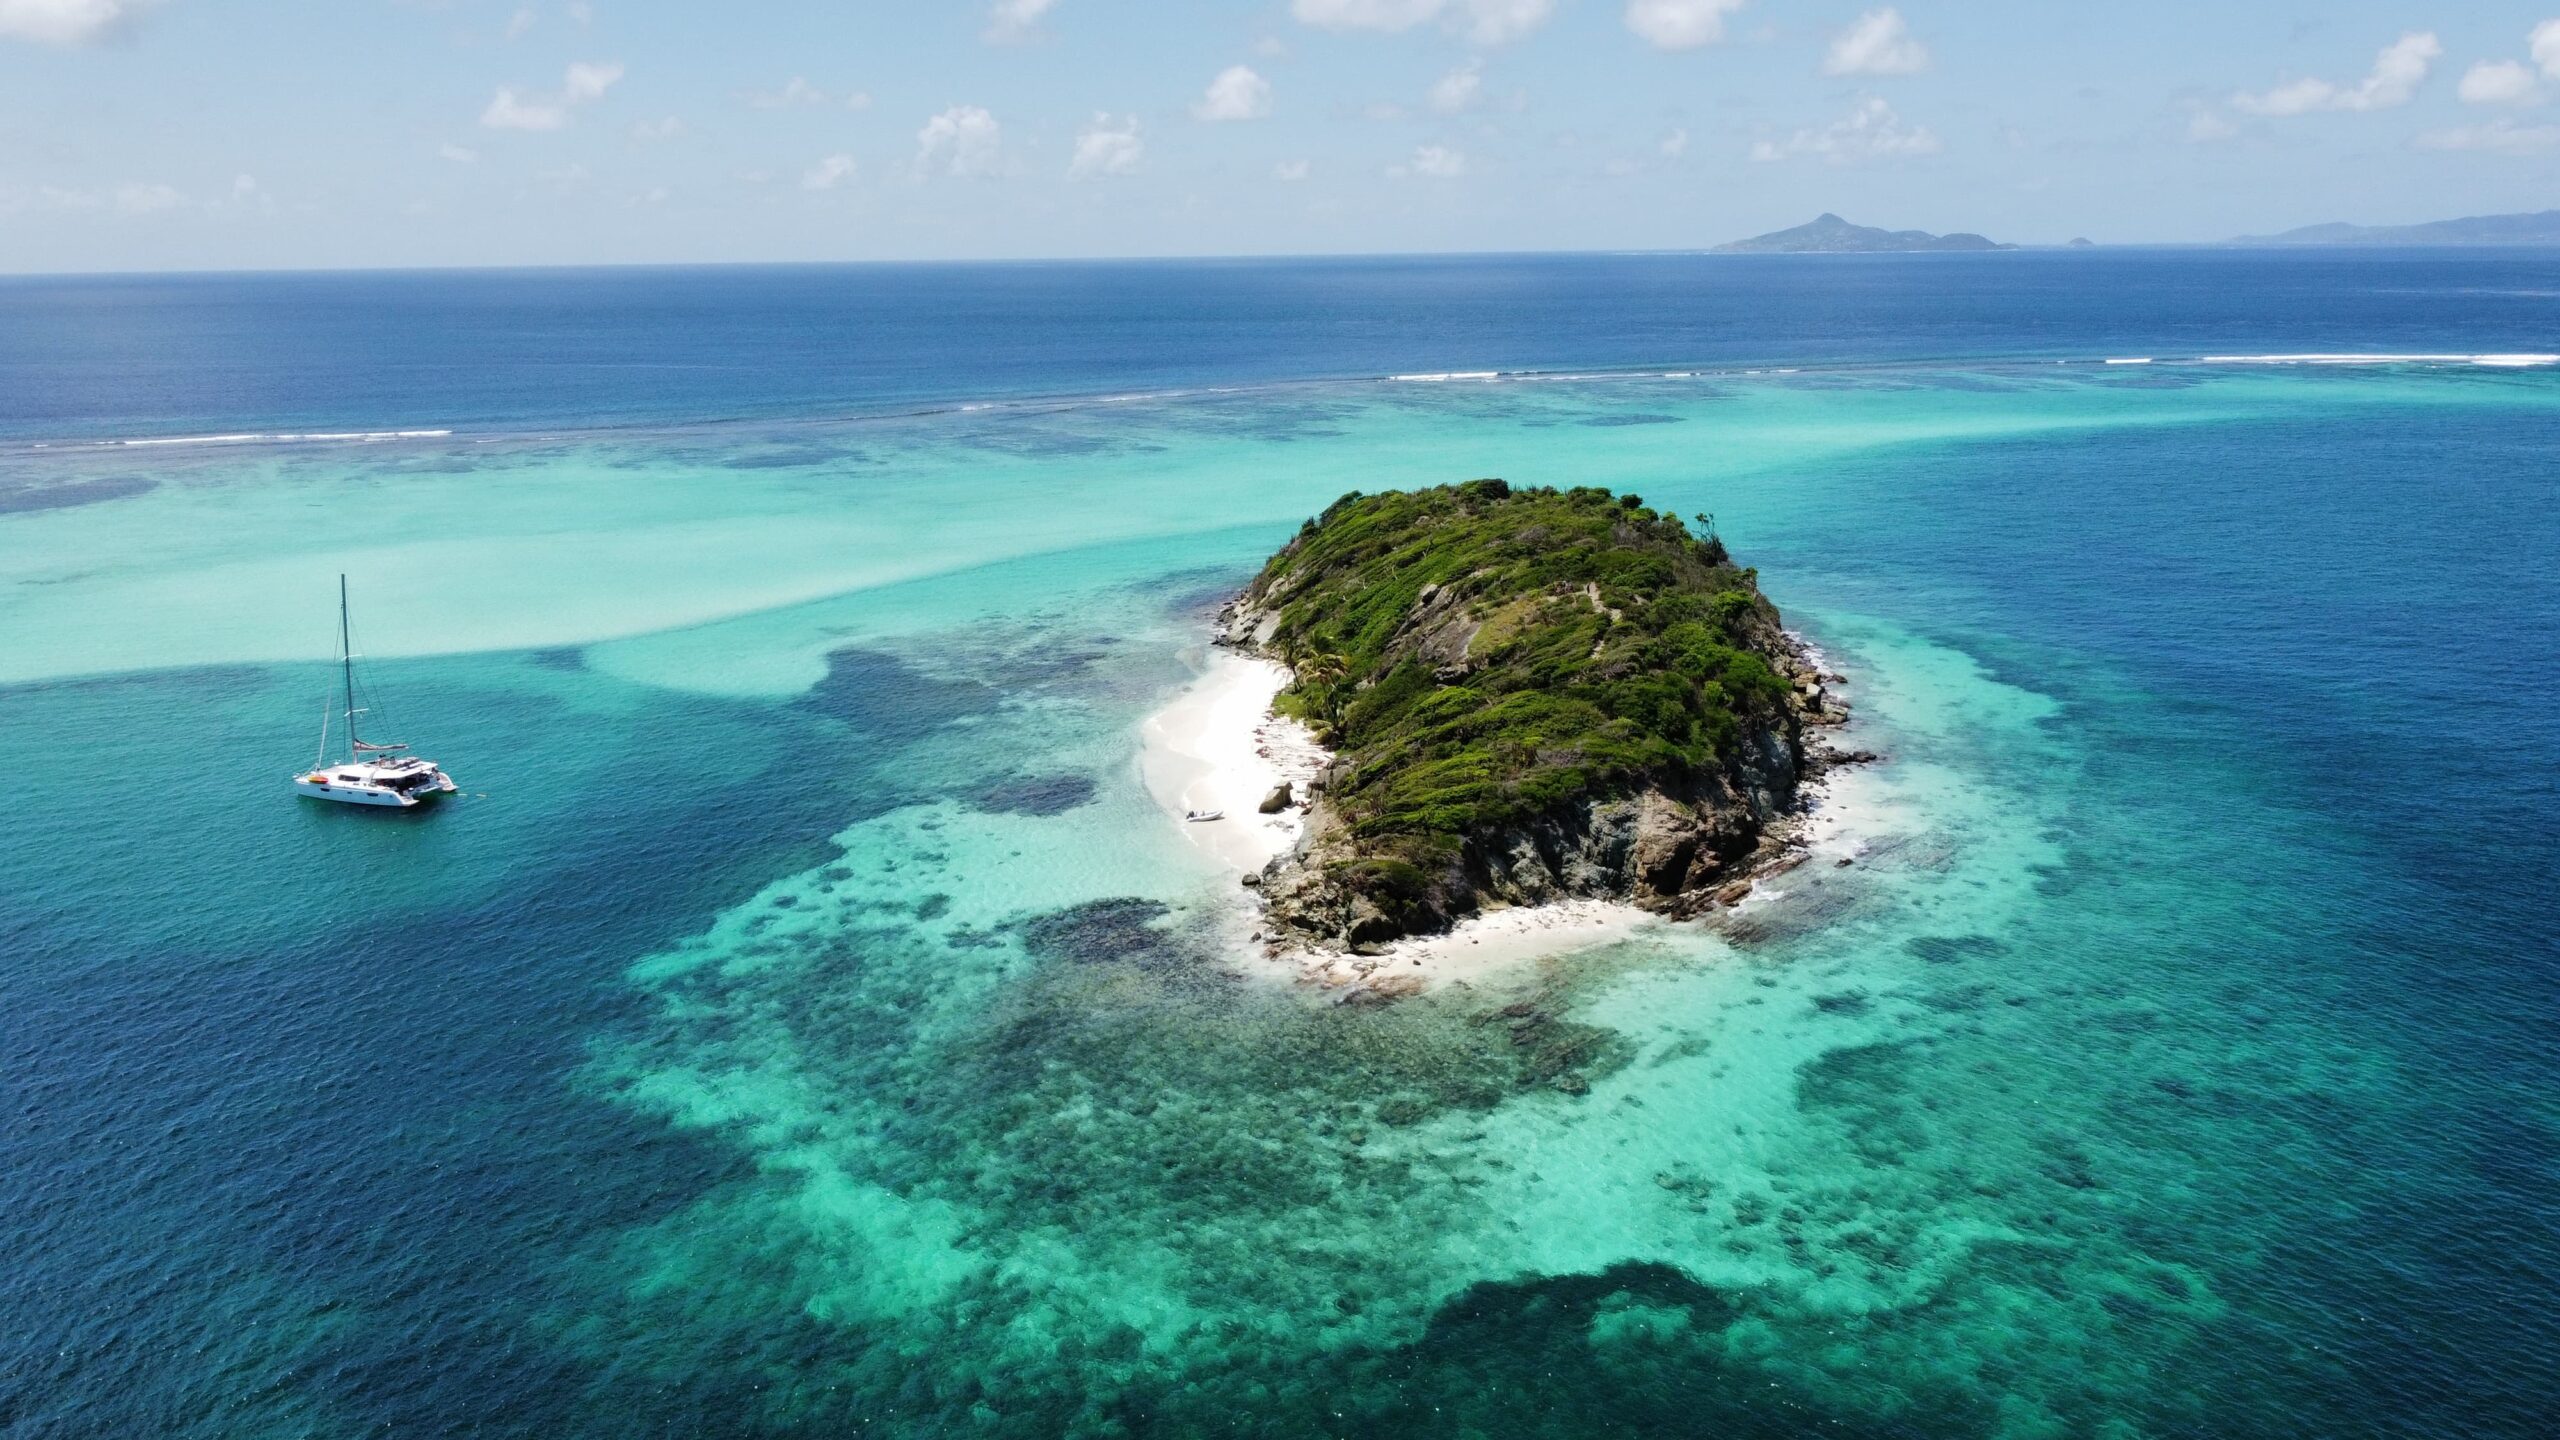 Tobago Cays, Saint Vincent and the Grenadines